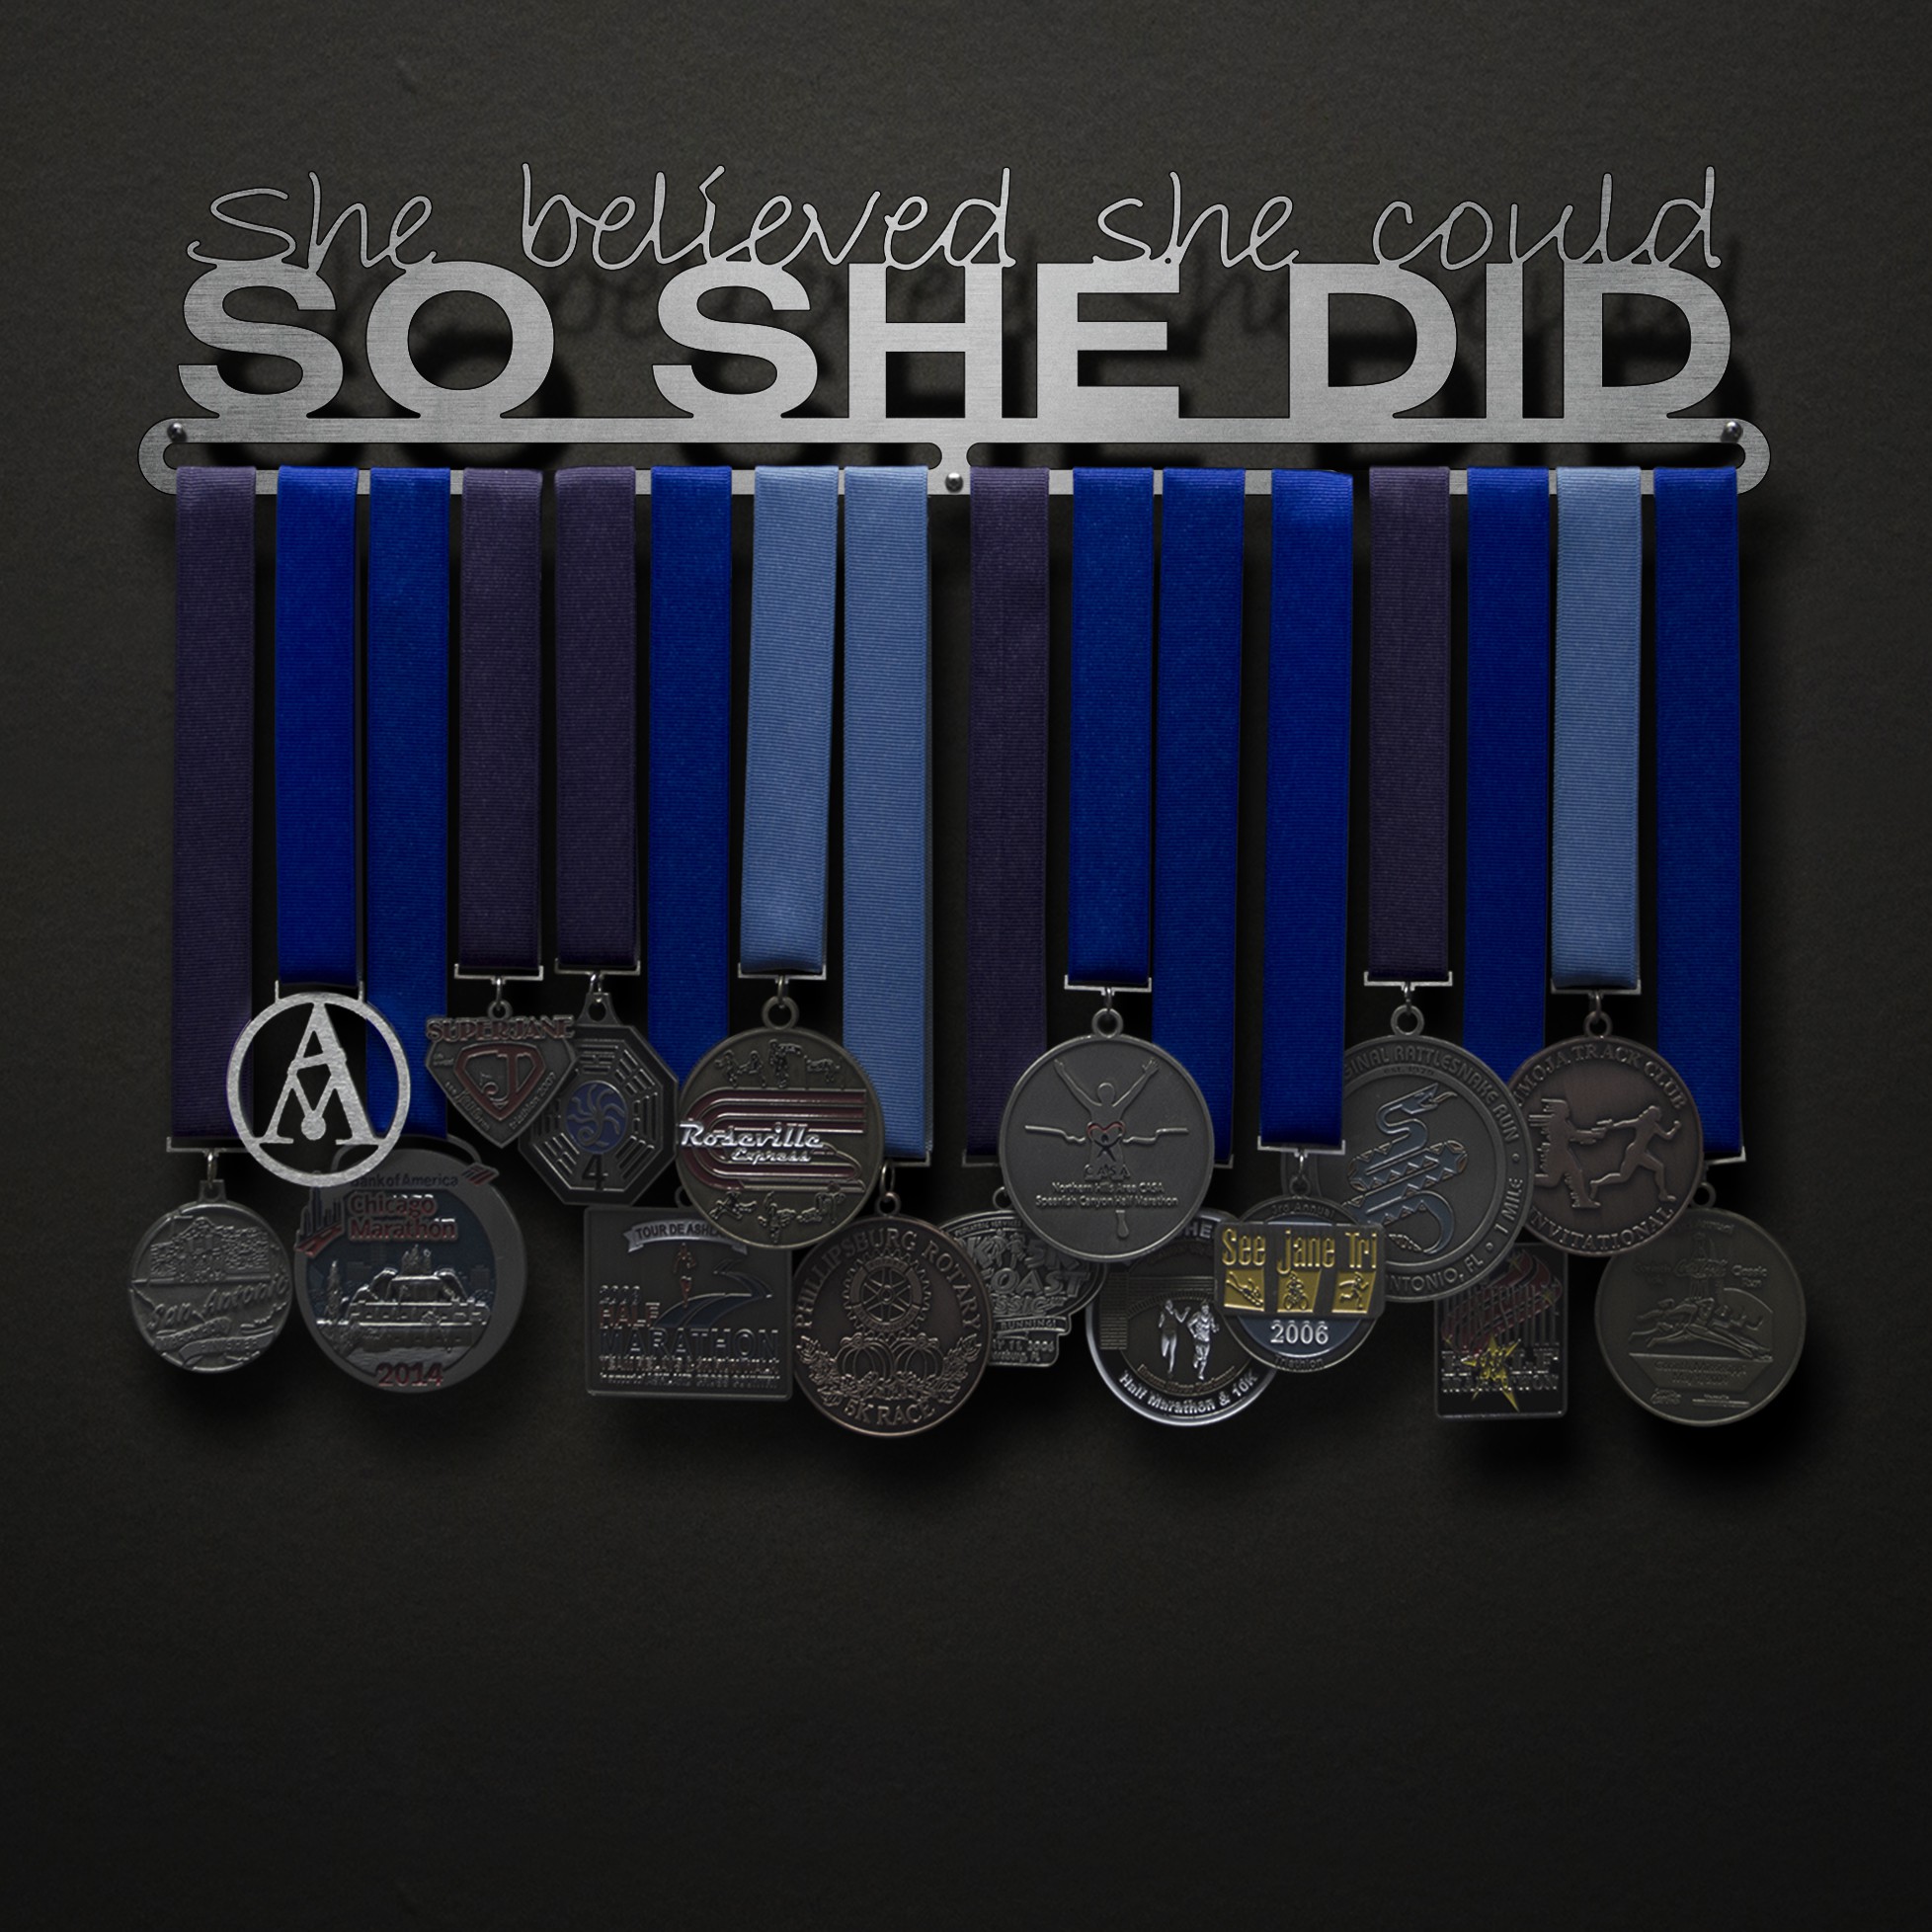 She Believed She Could So She Did - Text Only (no runner figure)